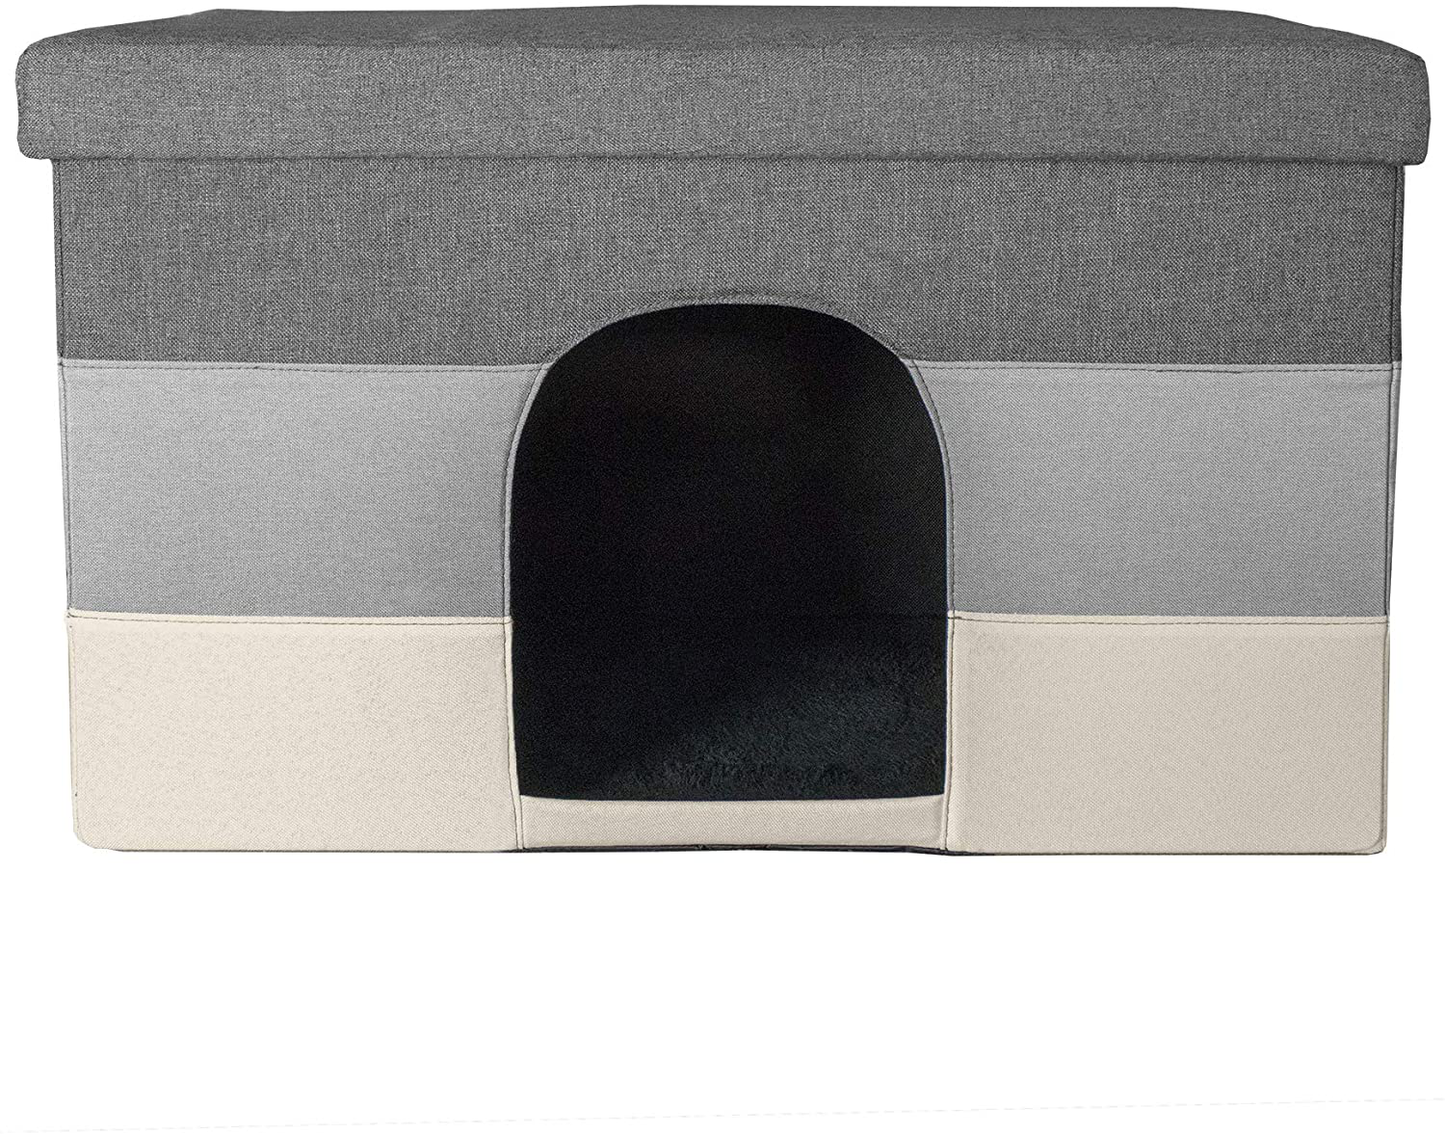 Furhaven Pet House for Cats, Kittens, and Small Dogs - Ottoman Footstool Dog House and Storage, Felt Cubby Cat Bed House, and More Animals & Pet Supplies > Pet Supplies > Dog Supplies > Dog Houses Furhaven Pet Products, Inc.   